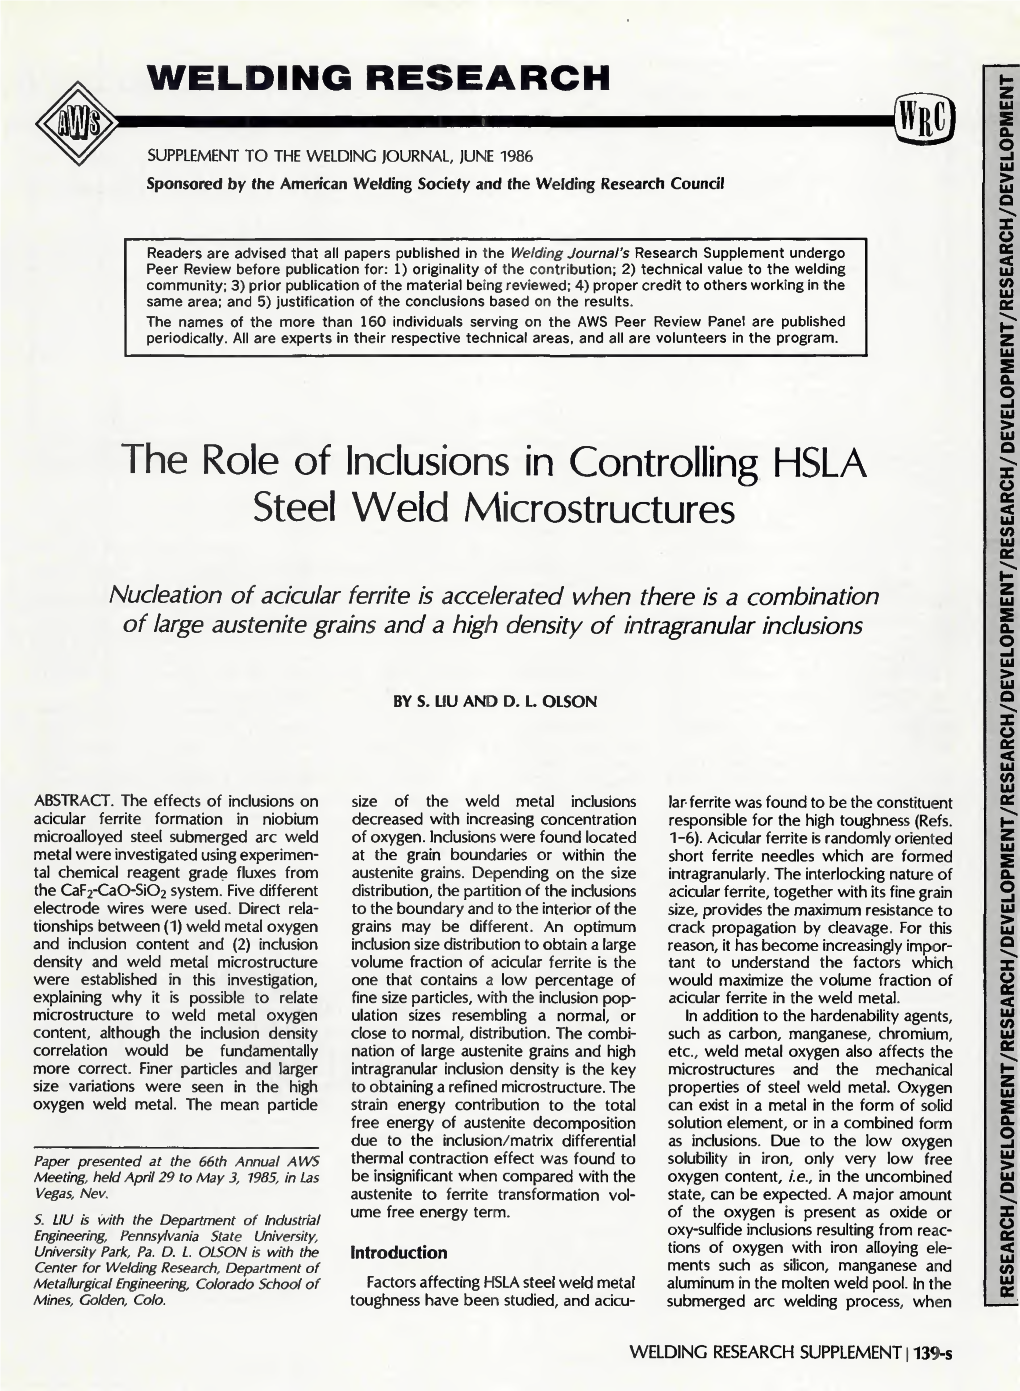 The Role of Inclusions in Controlling HSLA Steel Weld Microstructures